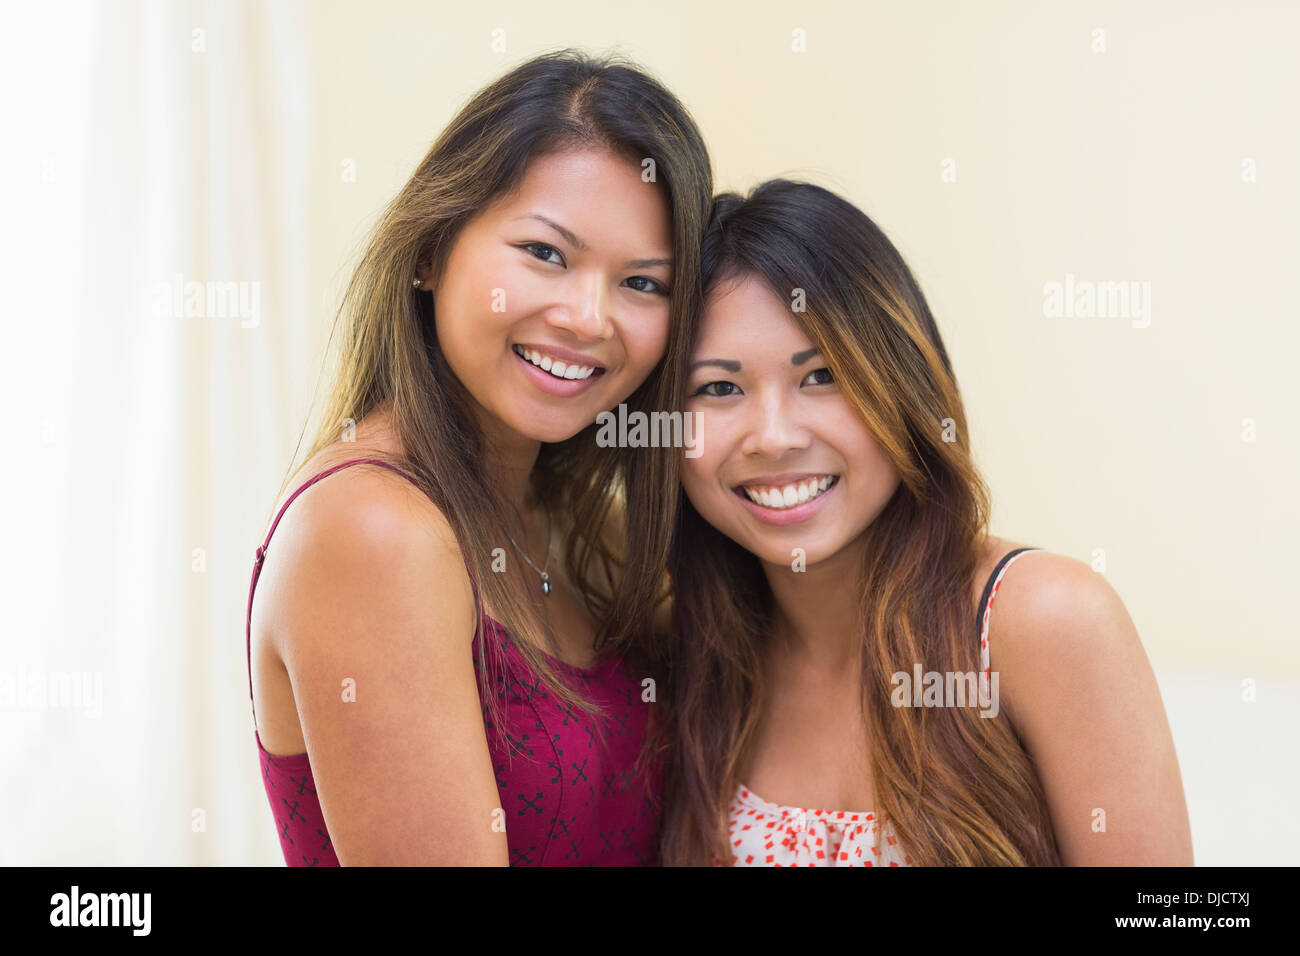 Two pretty women posing for the camera Stock Photo